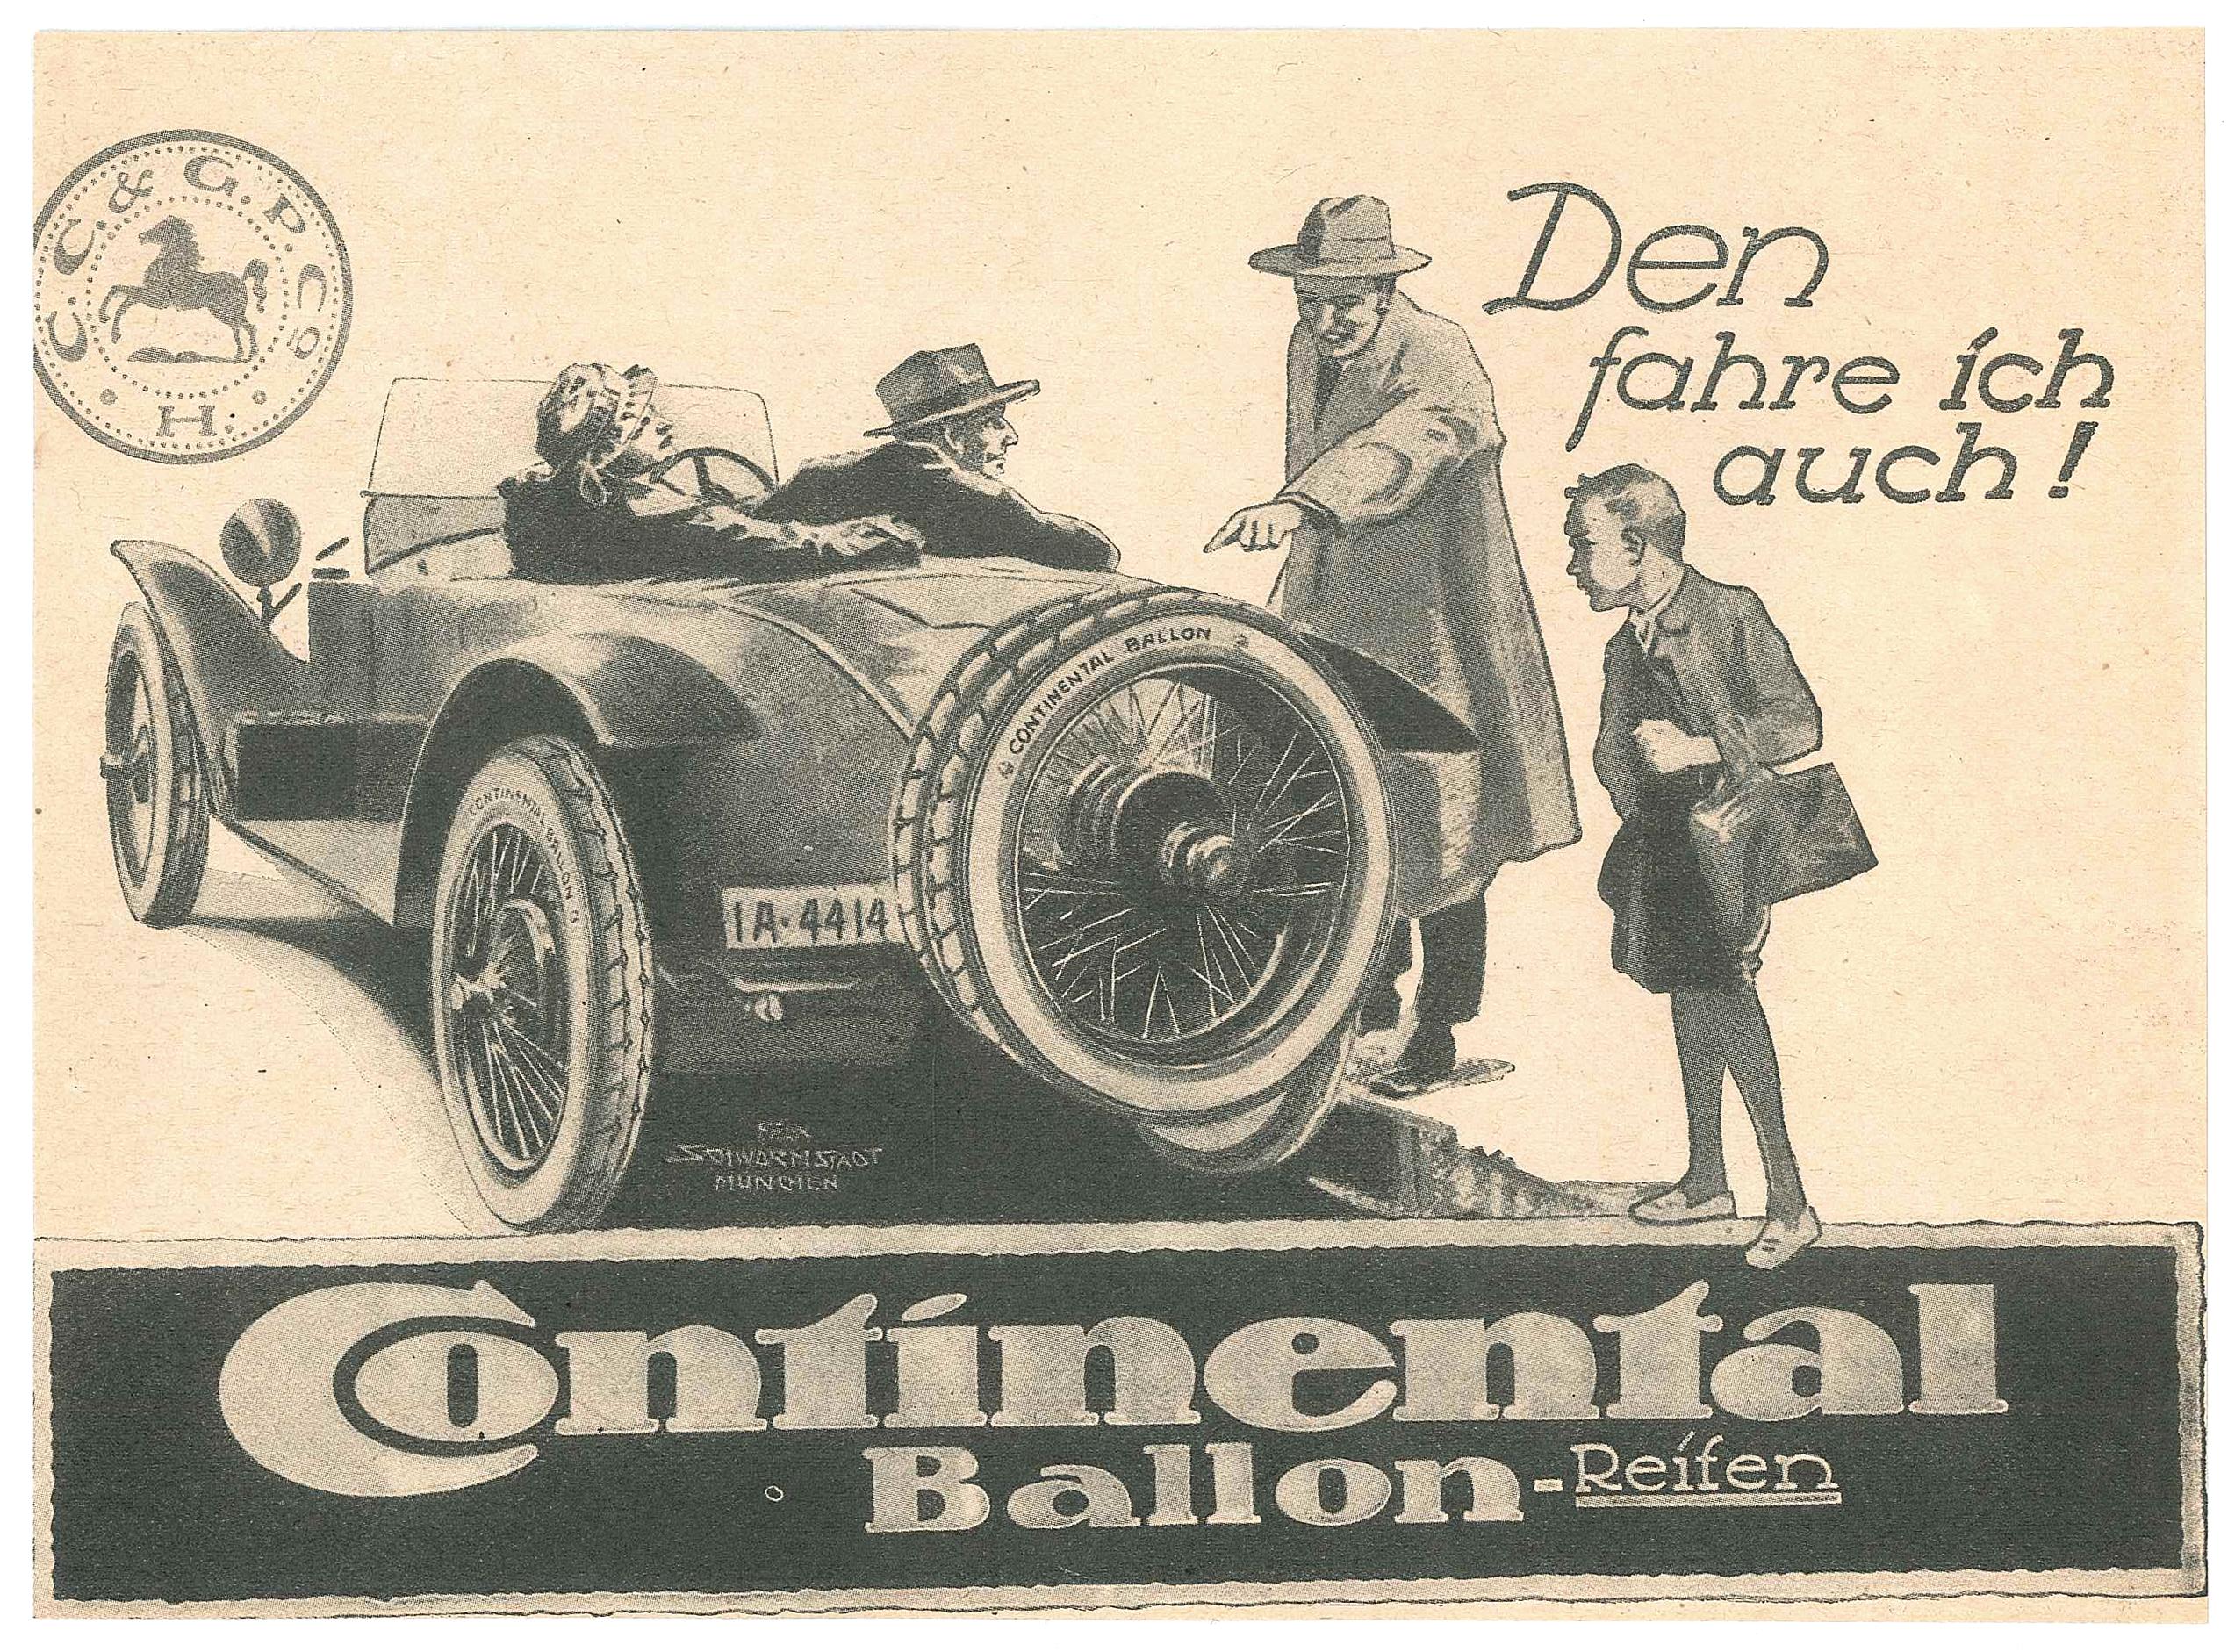 Continental Ballon - Original Vintage Advertising on Paper - Early 20th Century